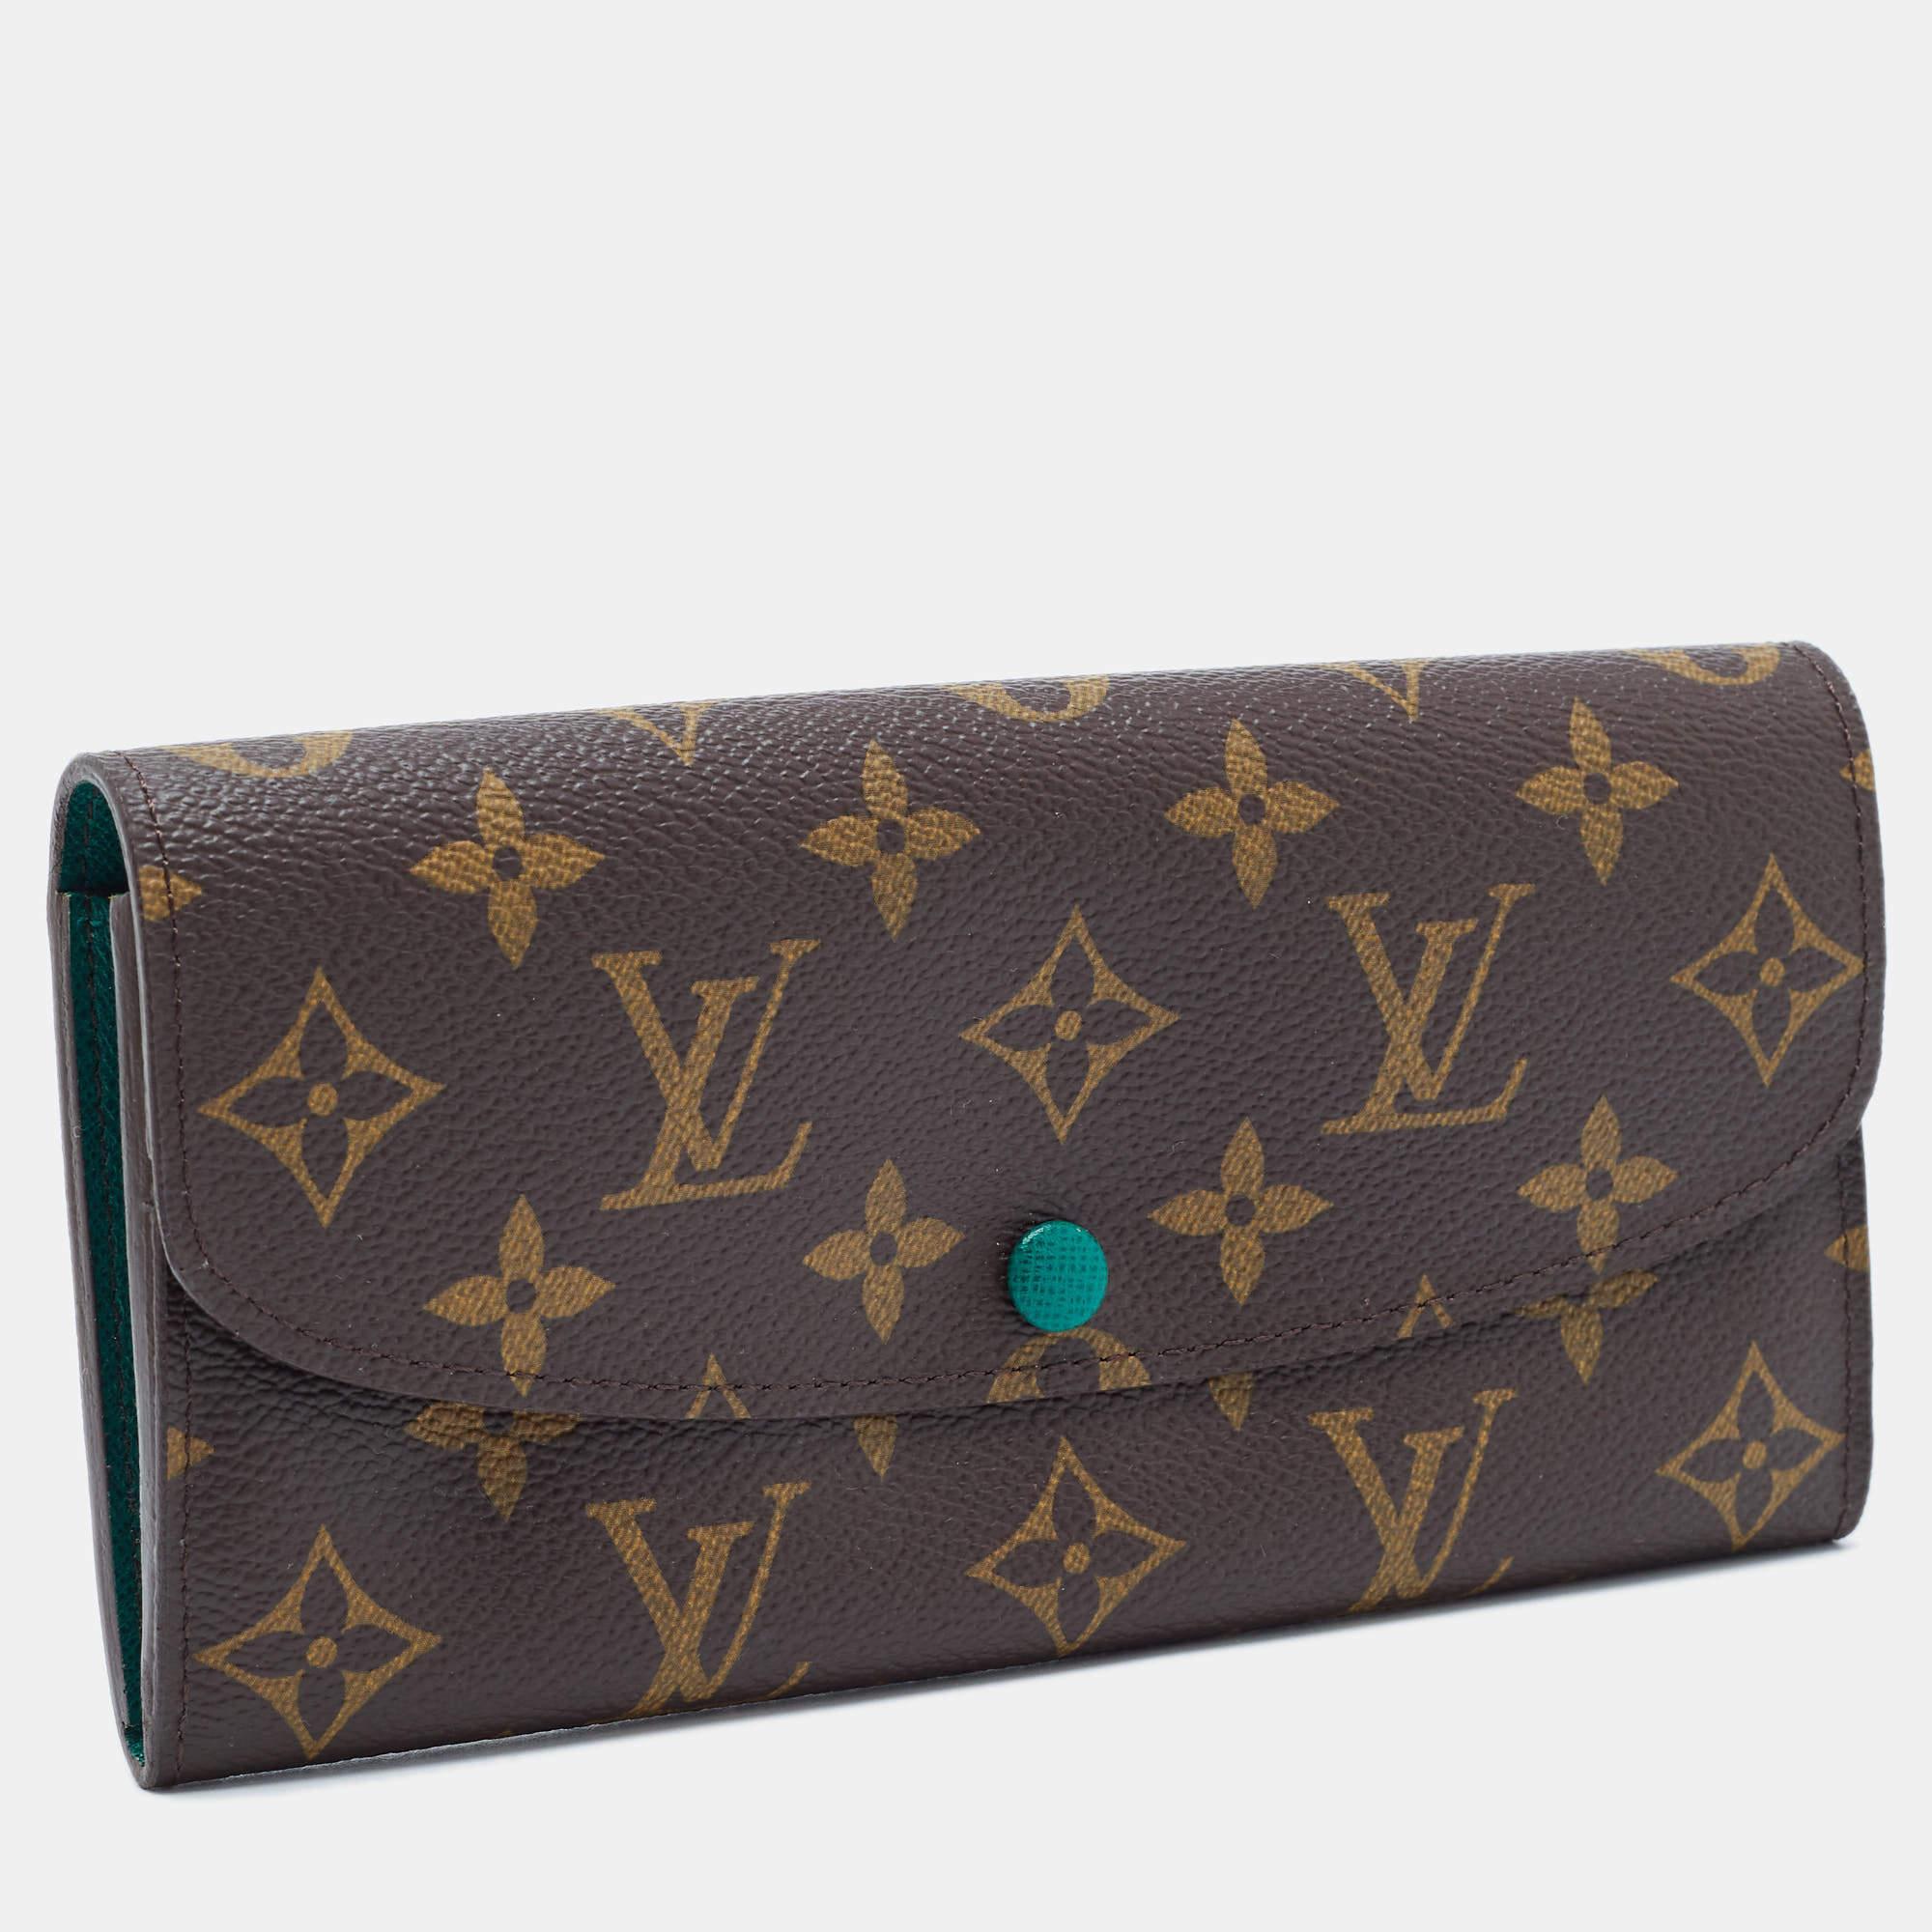 Handy and stylish, this Emilie wallet is from the house of Louis Vuitton. Made from Monogram canvas, the buttoned closure opens to an expanse with compartments to arrange currency, bills and a zip coin pocket. Perfect in size, it can easily fit